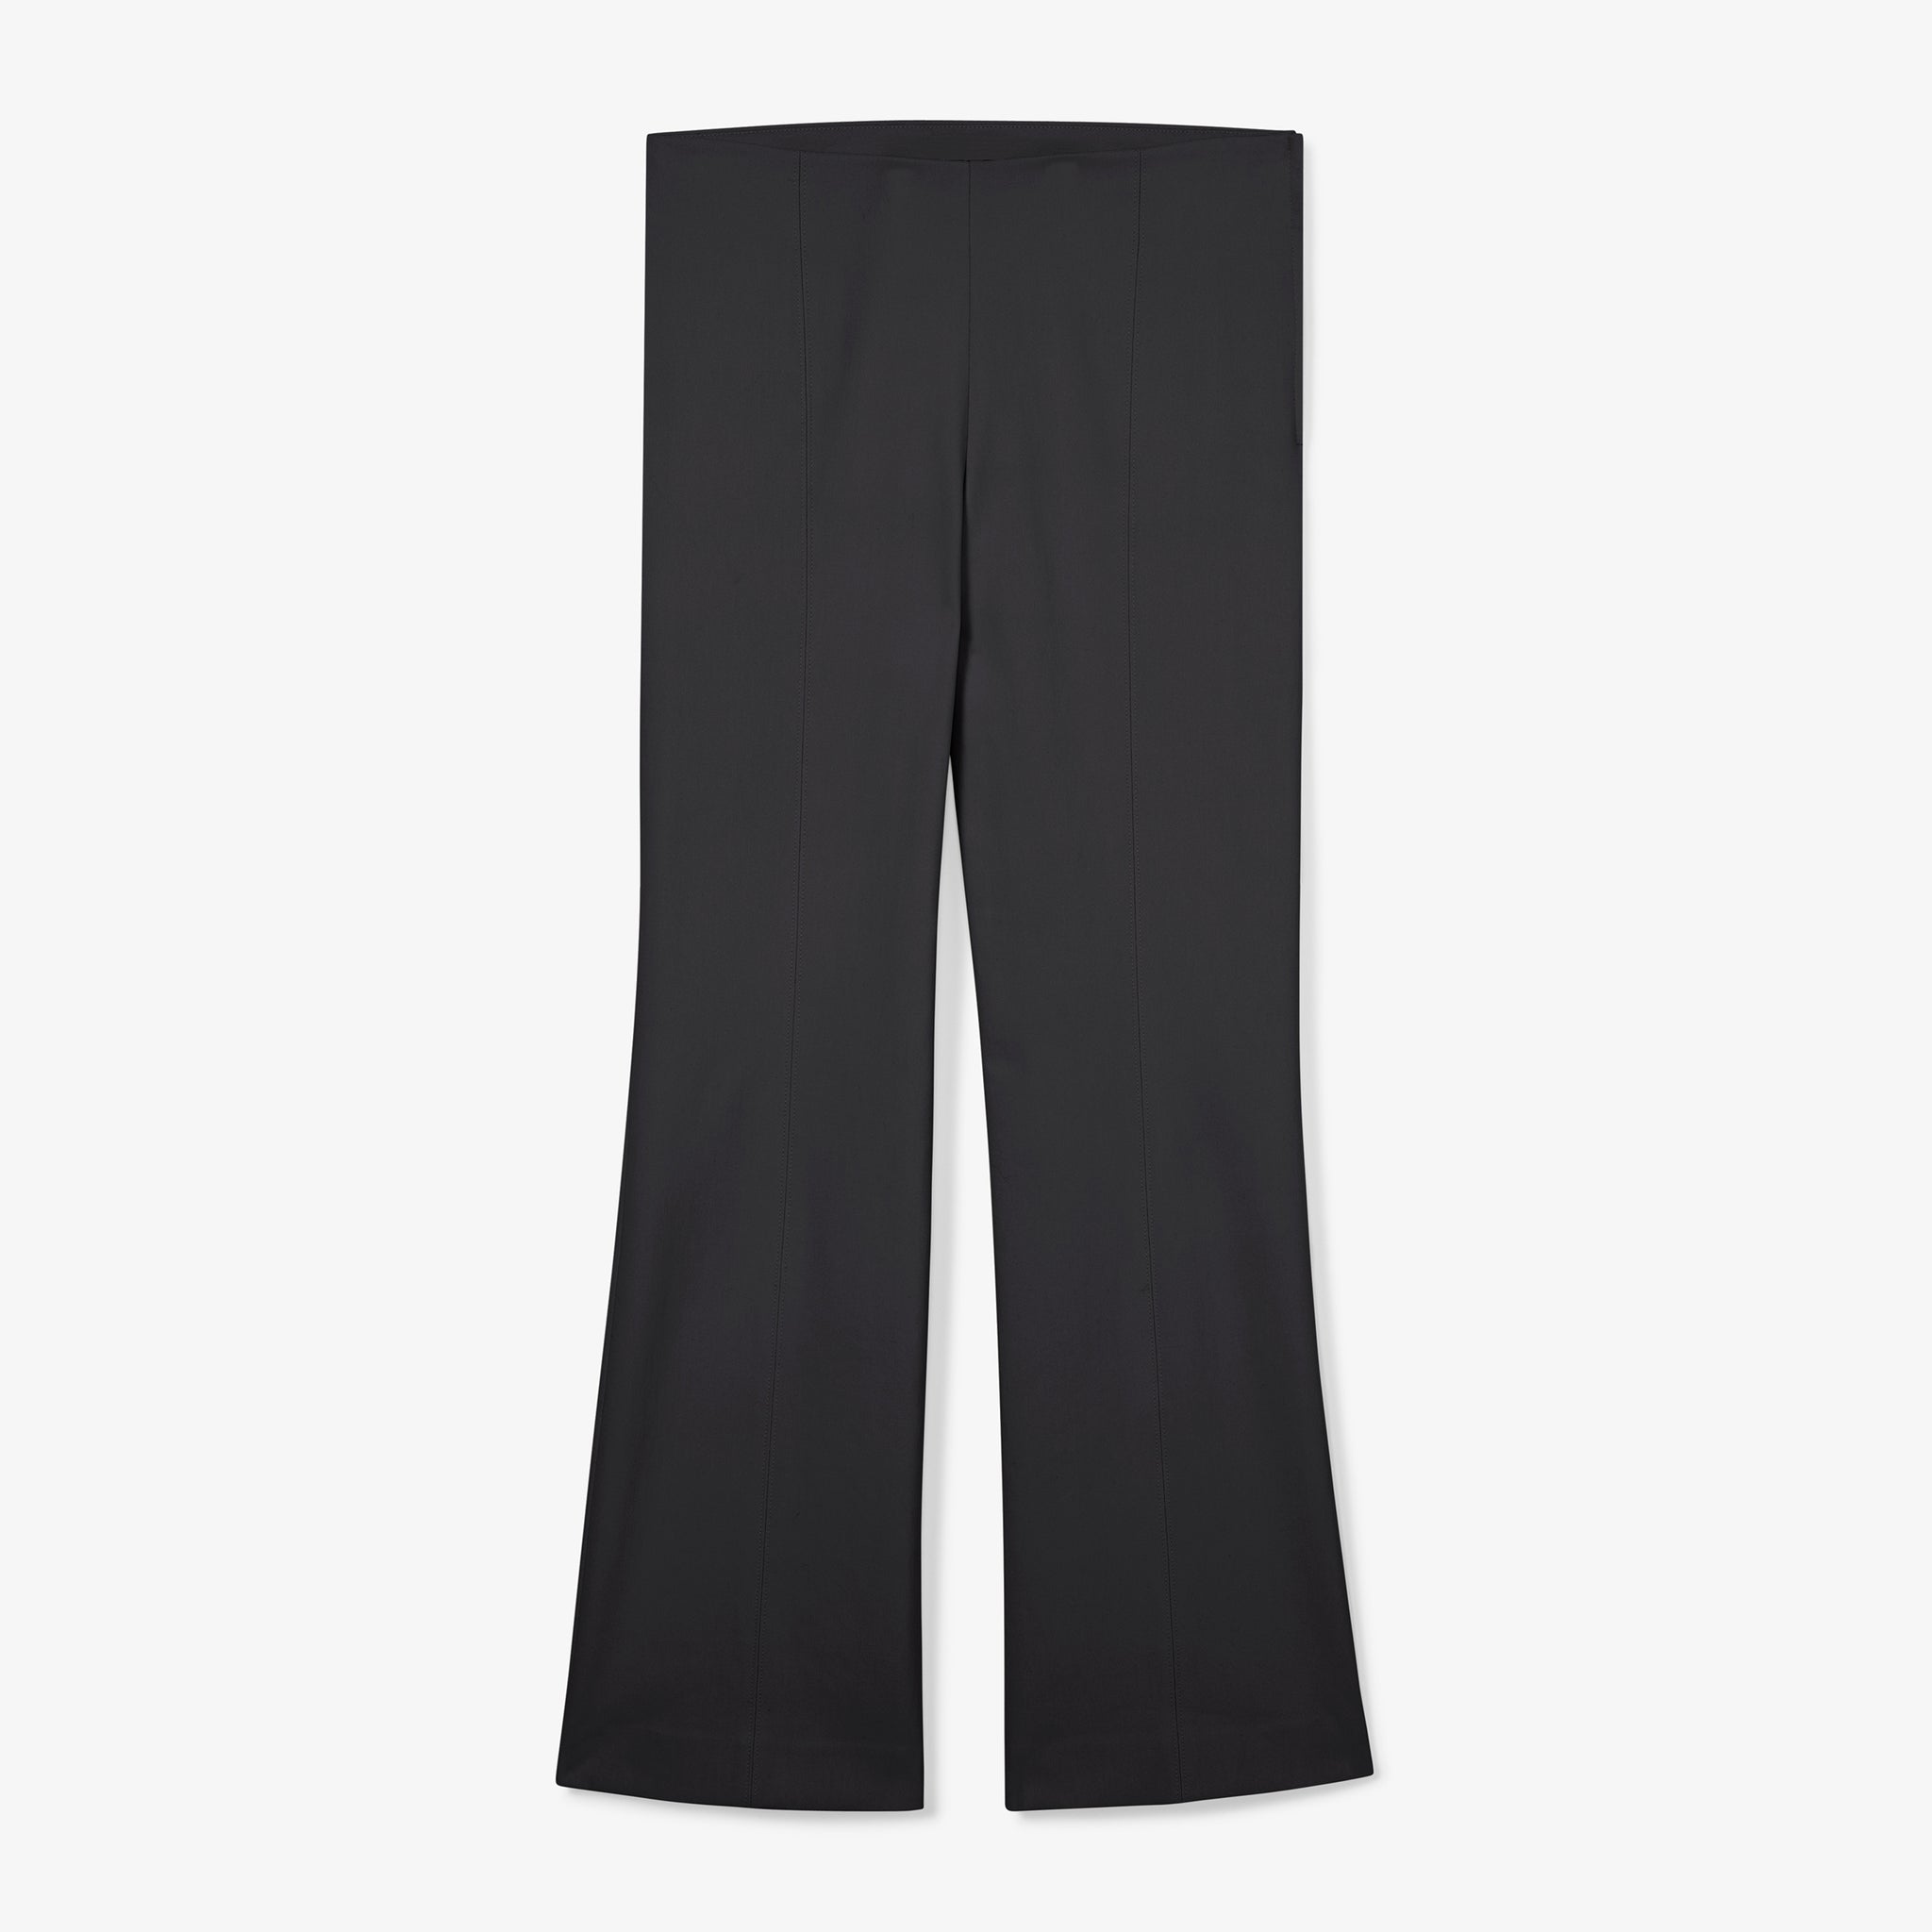 Still image of the kick flare foster pant